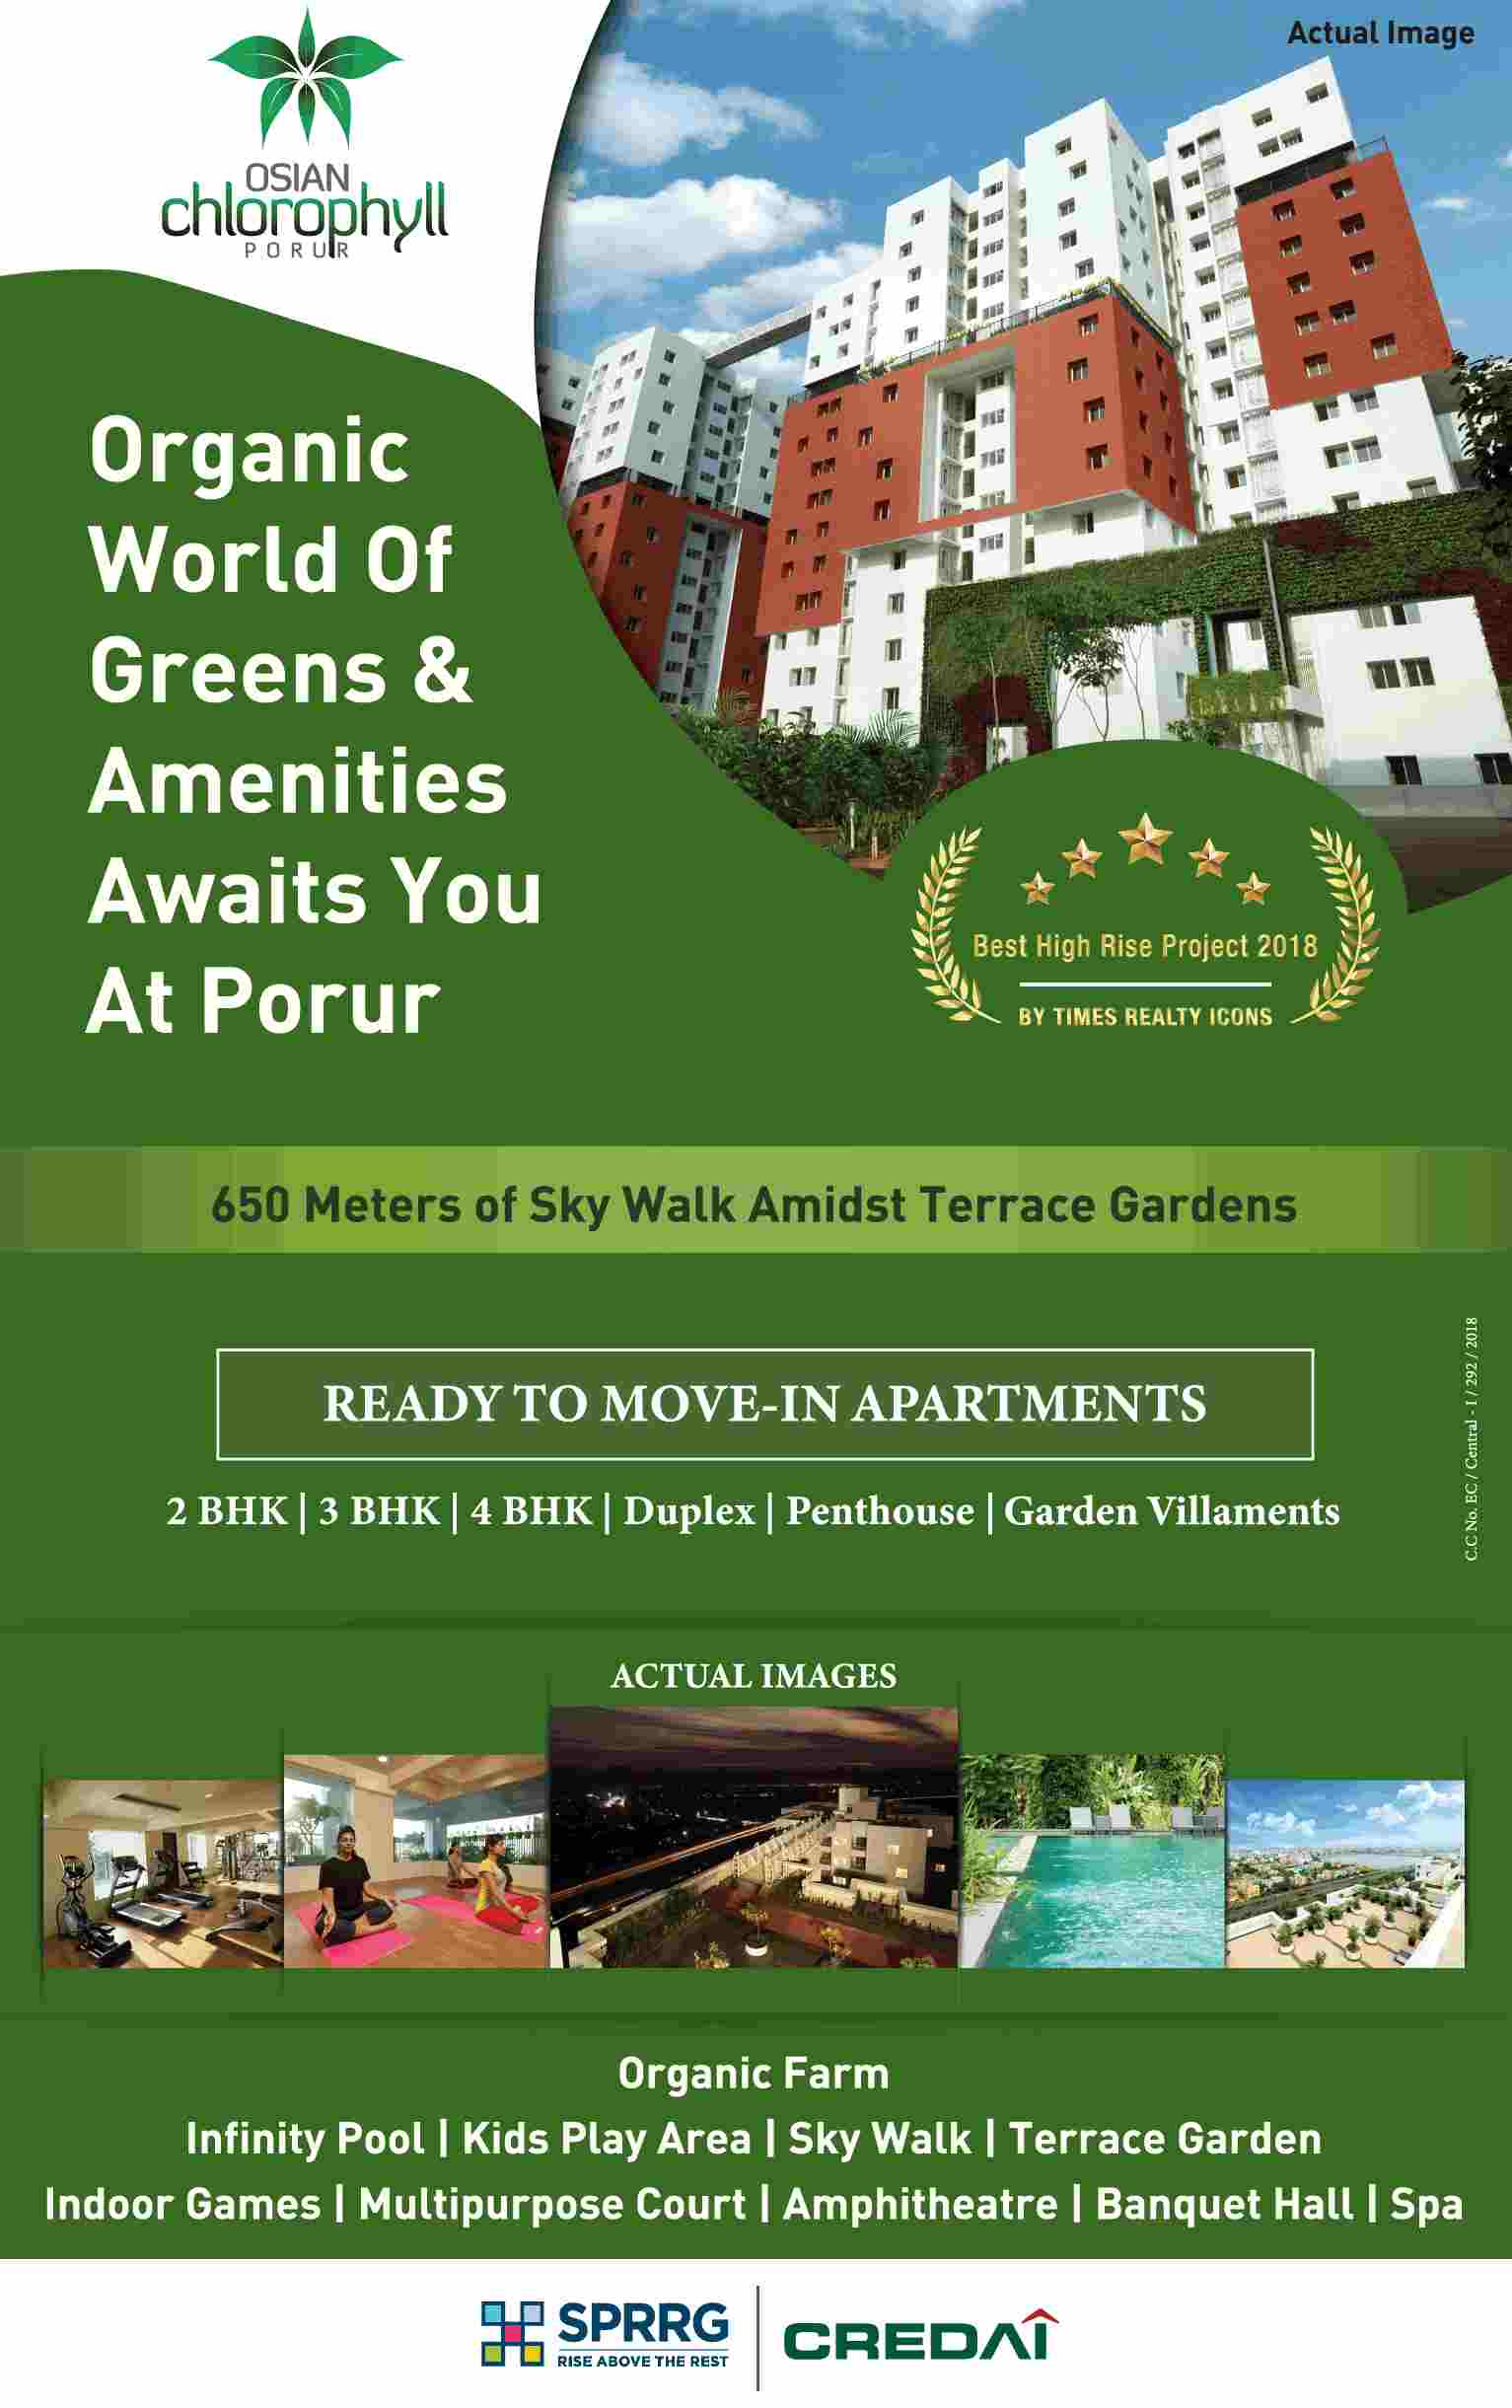 Book ready to move apartments & experience organic world of greens at SPR Osian Chlorophyll in Chennai Update